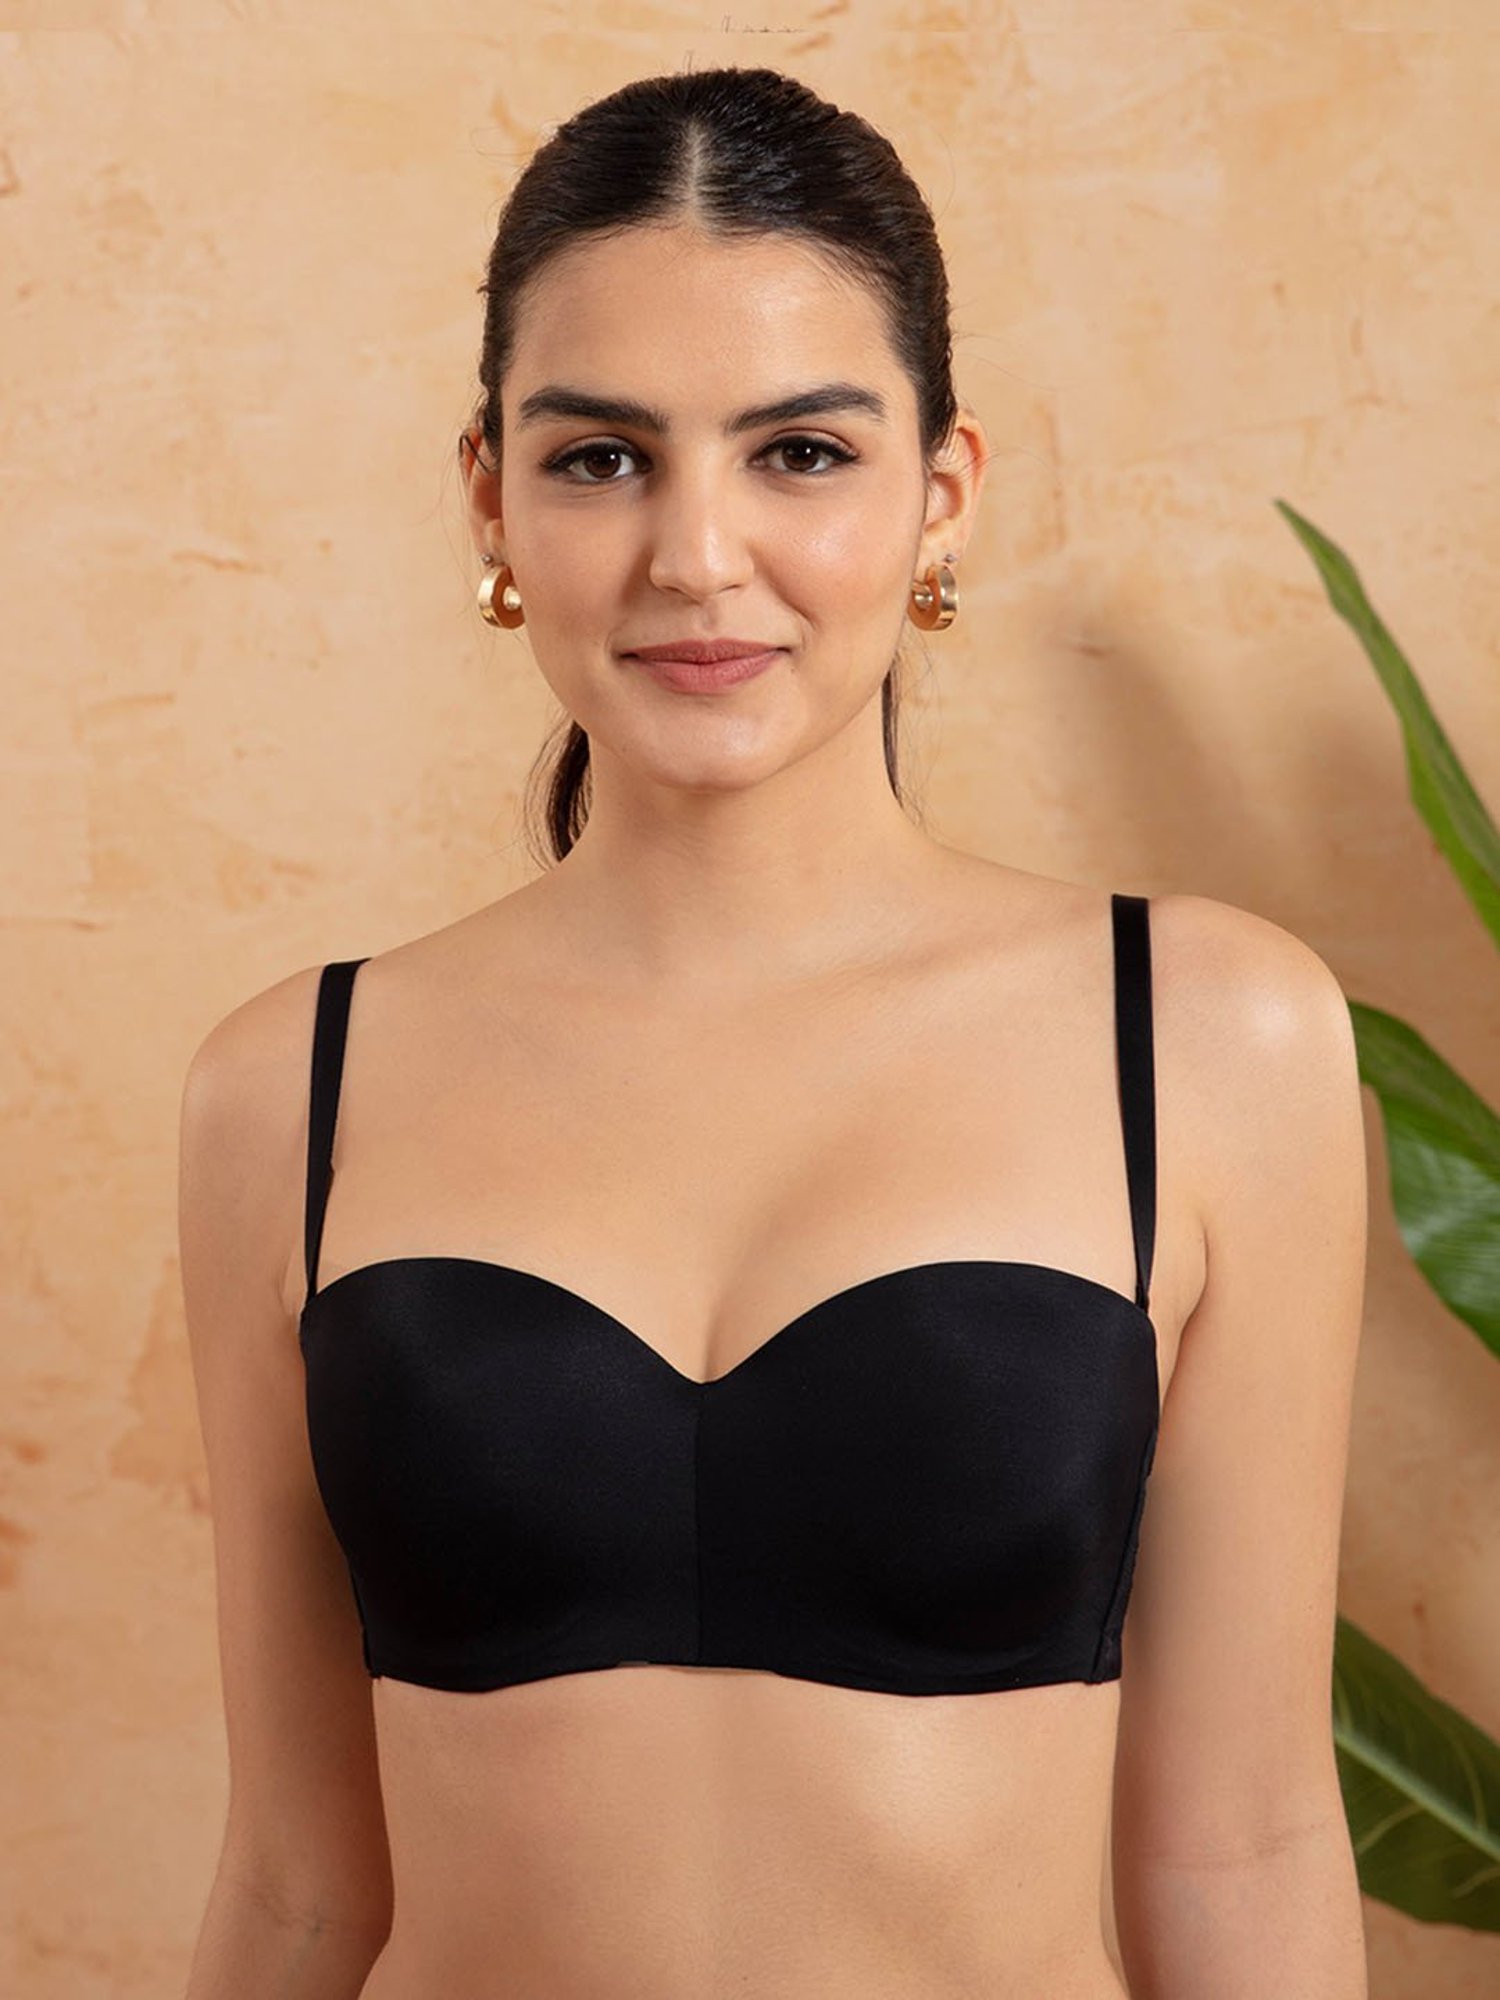 Nykd By Nykaa Posture Corrector Bra For Women, Non-Padded, Wireless, Full  Coverage